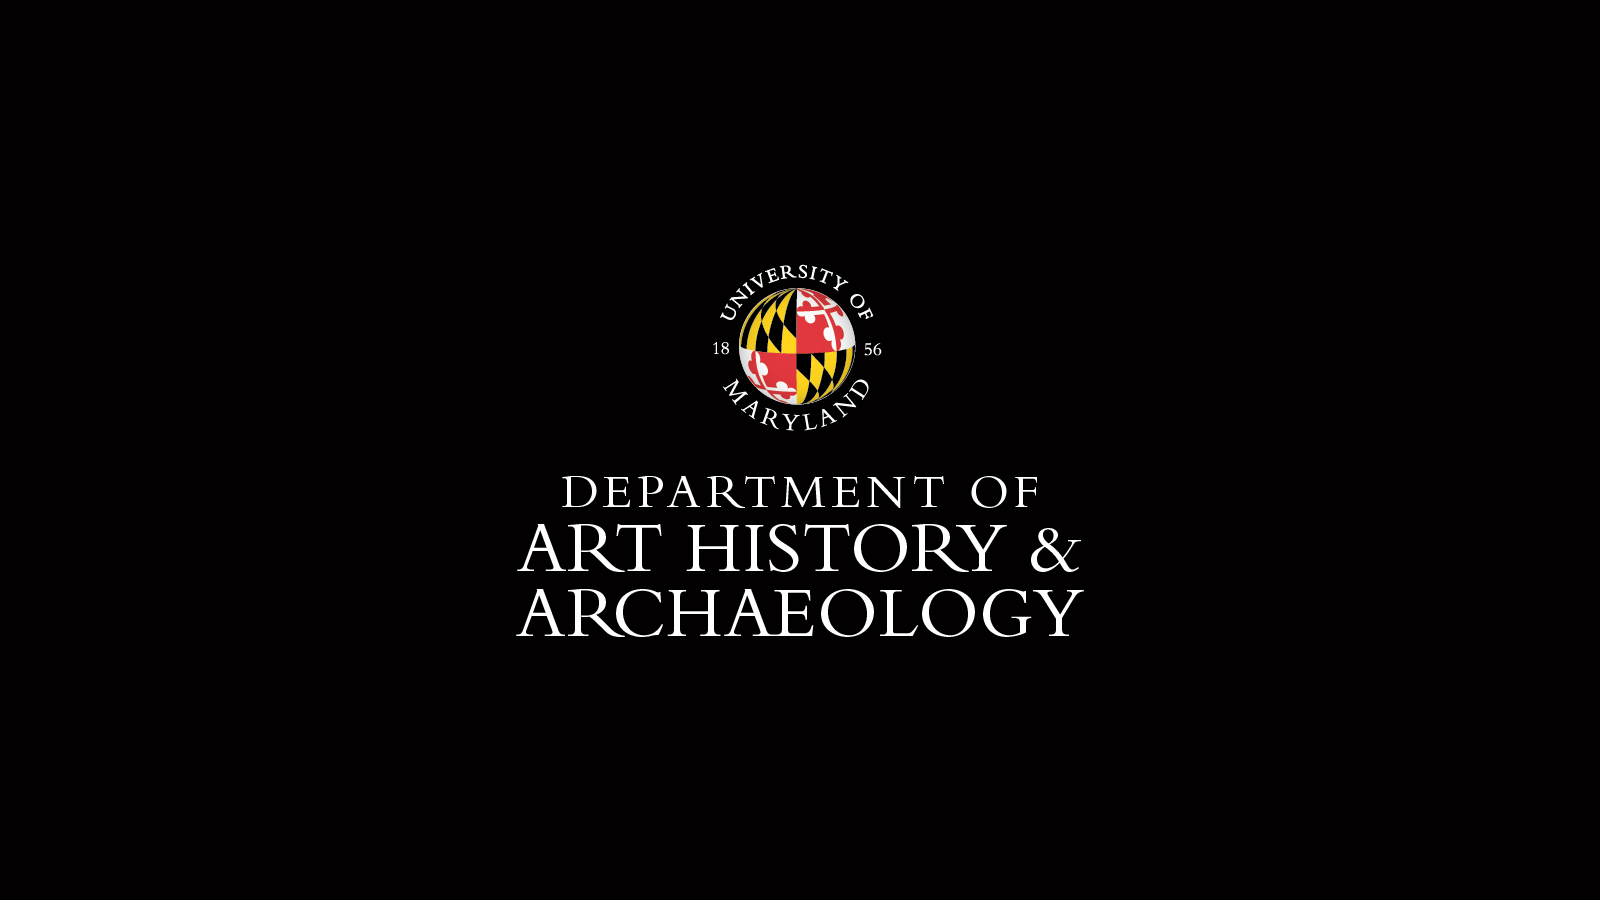 Department of Art history and Archaeology logo in white letters on black background